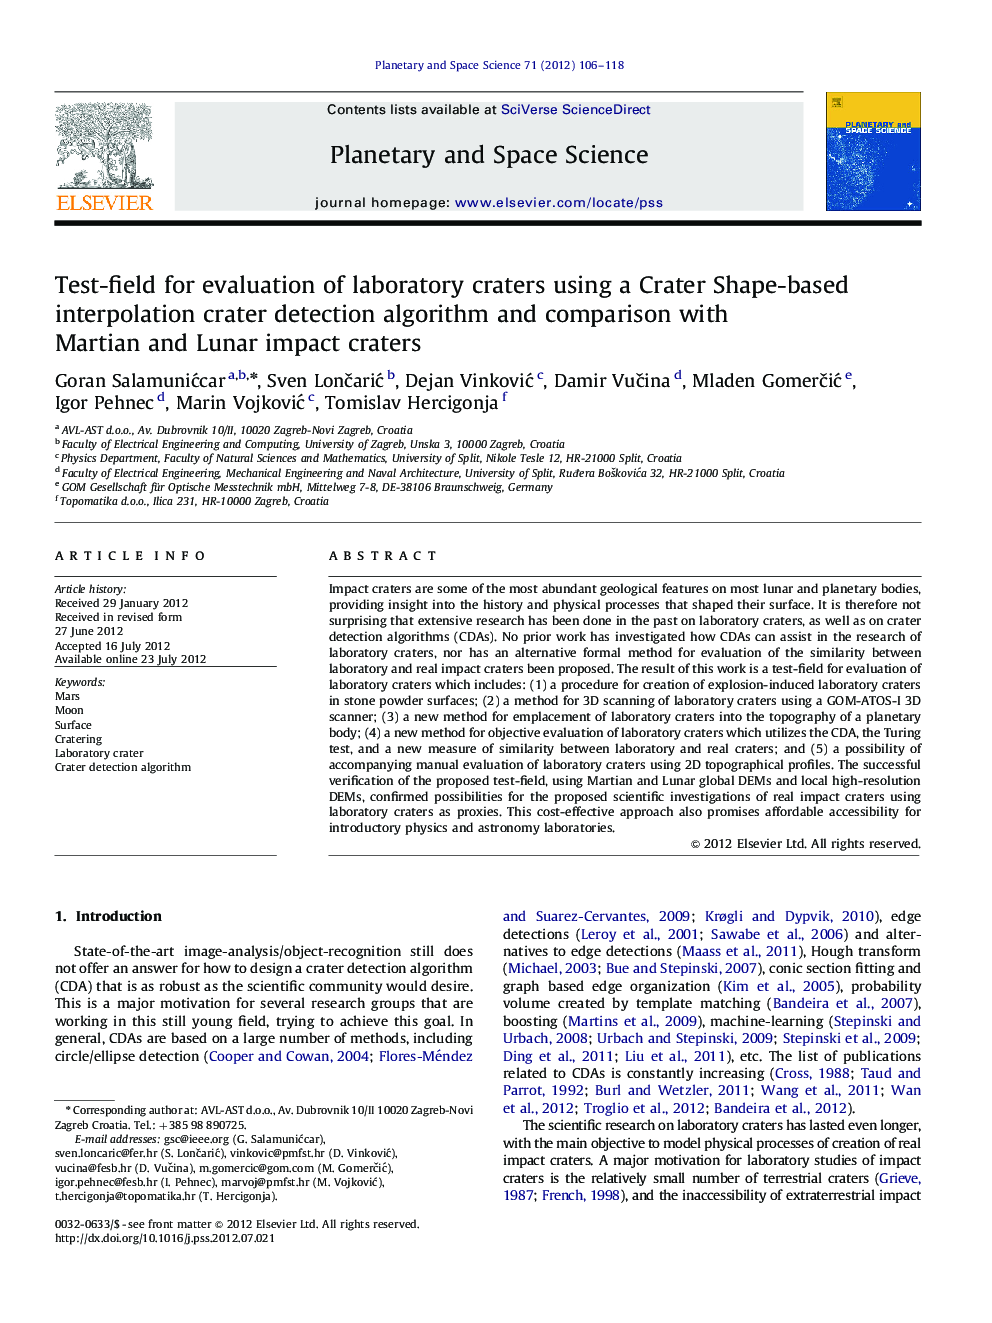 Test-field for evaluation of laboratory craters using a Crater Shape-based interpolation crater detection algorithm and comparison with Martian and Lunar impact craters